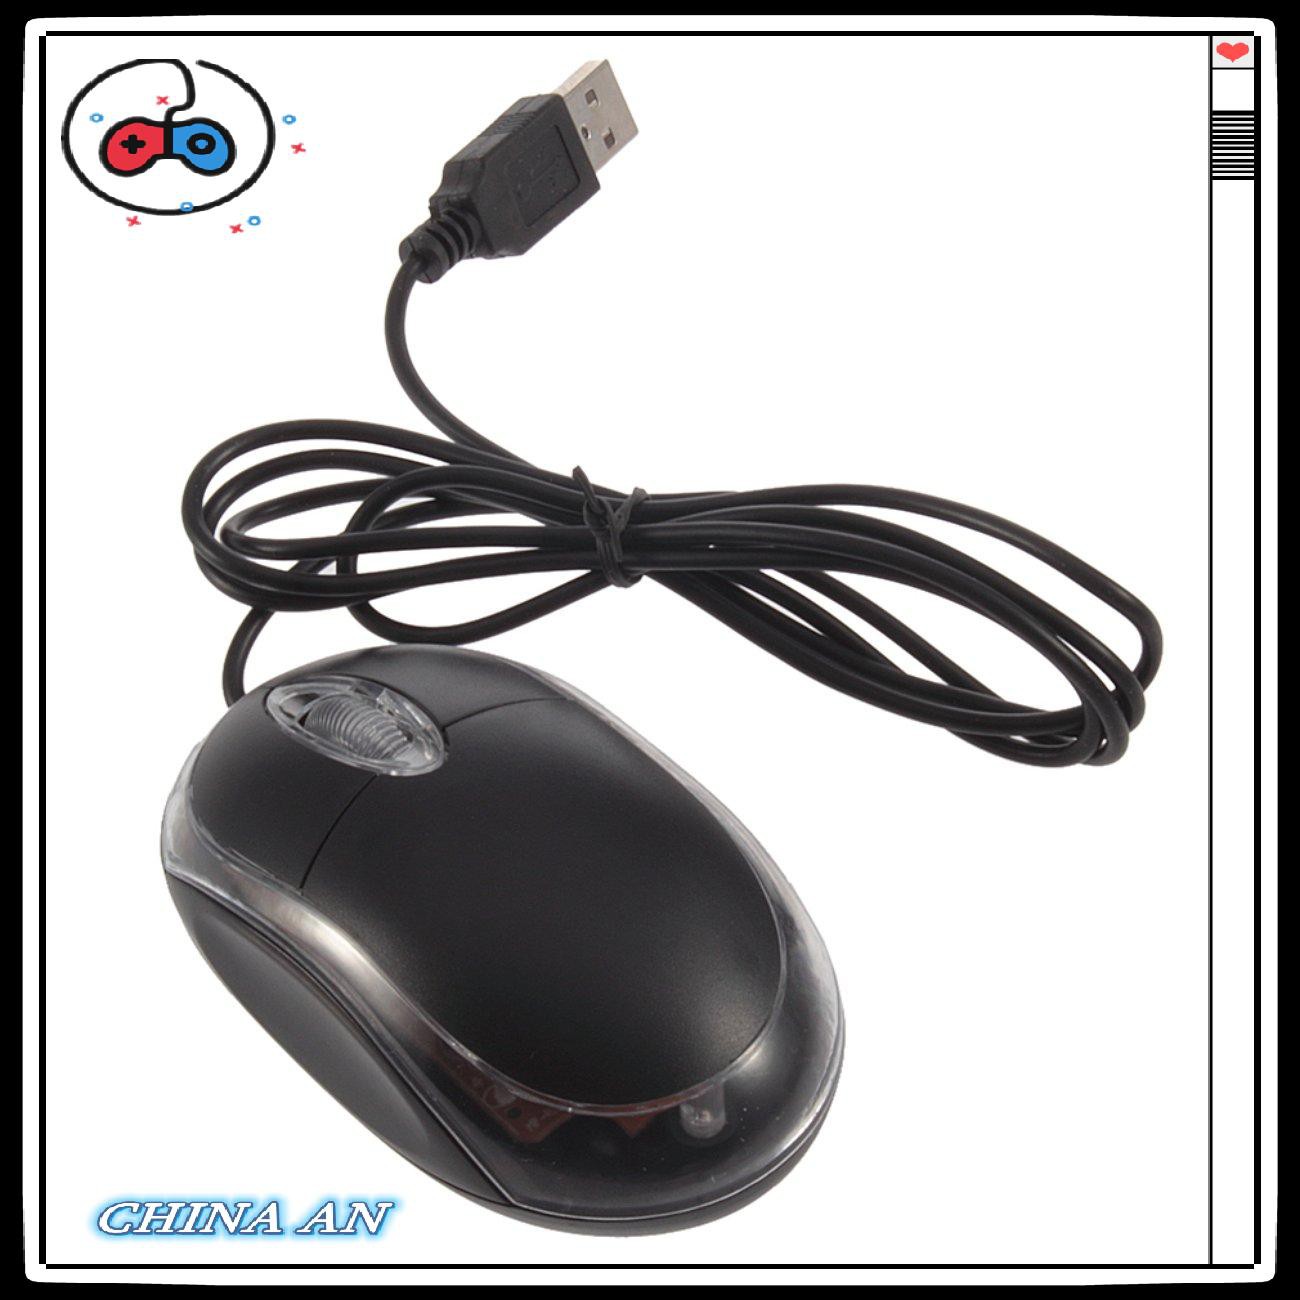 ⚡Hot sản phẩm/New 1.2M Tiny USB Optical Scroll Whell Mouse Mice For Dell For Asus Wired Mouse